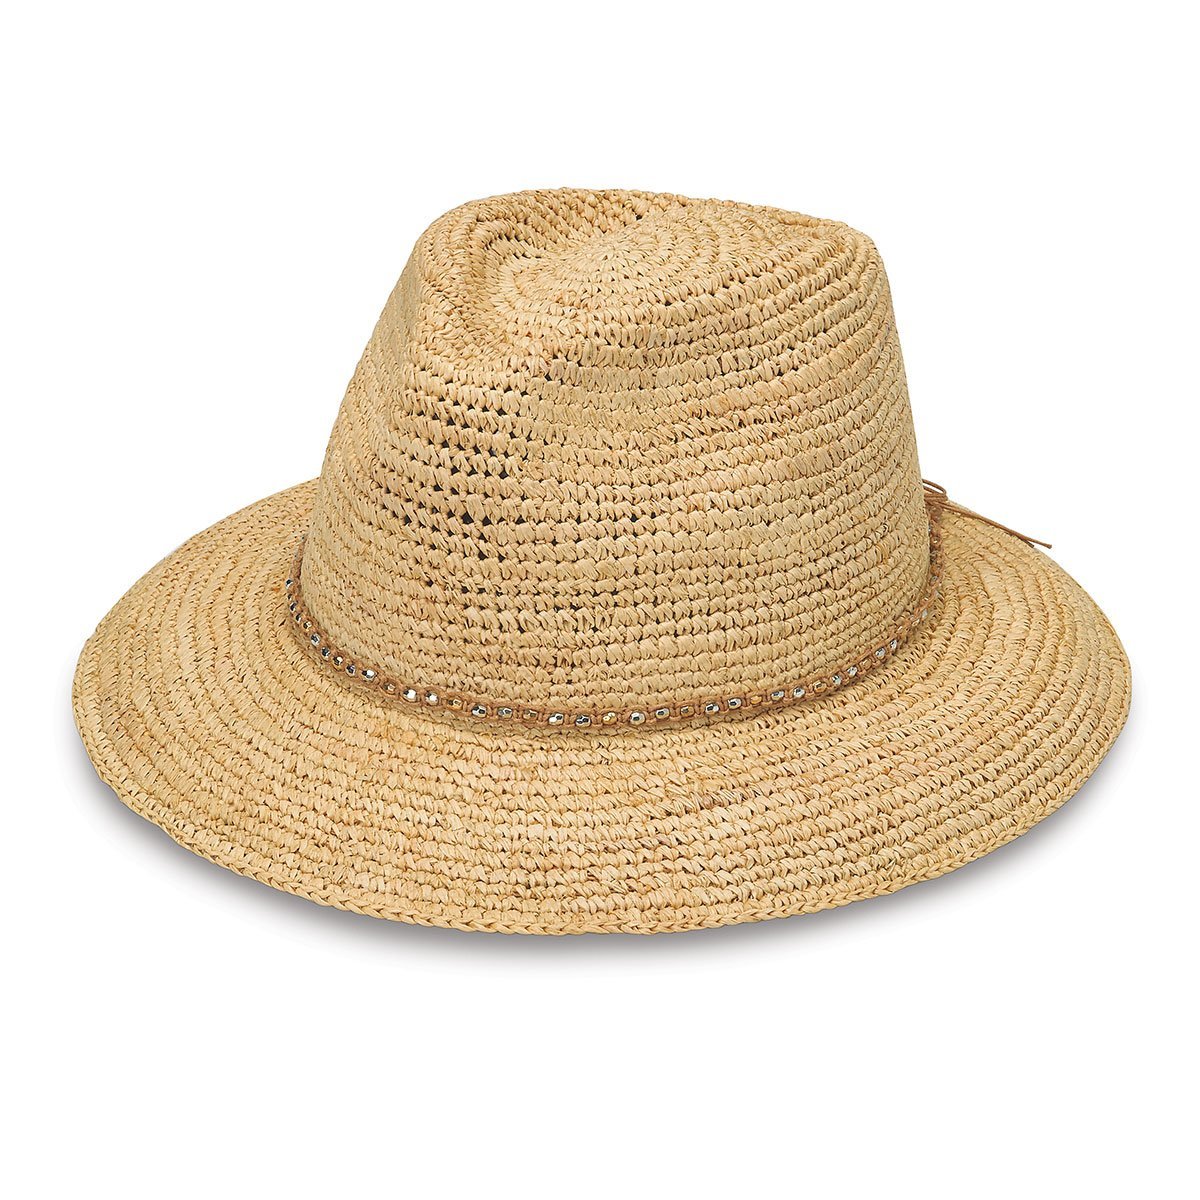 Featuring Front of Women's Adjustable Wide Brim Fedora Style Malibu Raffia Sun Hat in Natural from Wallaroo